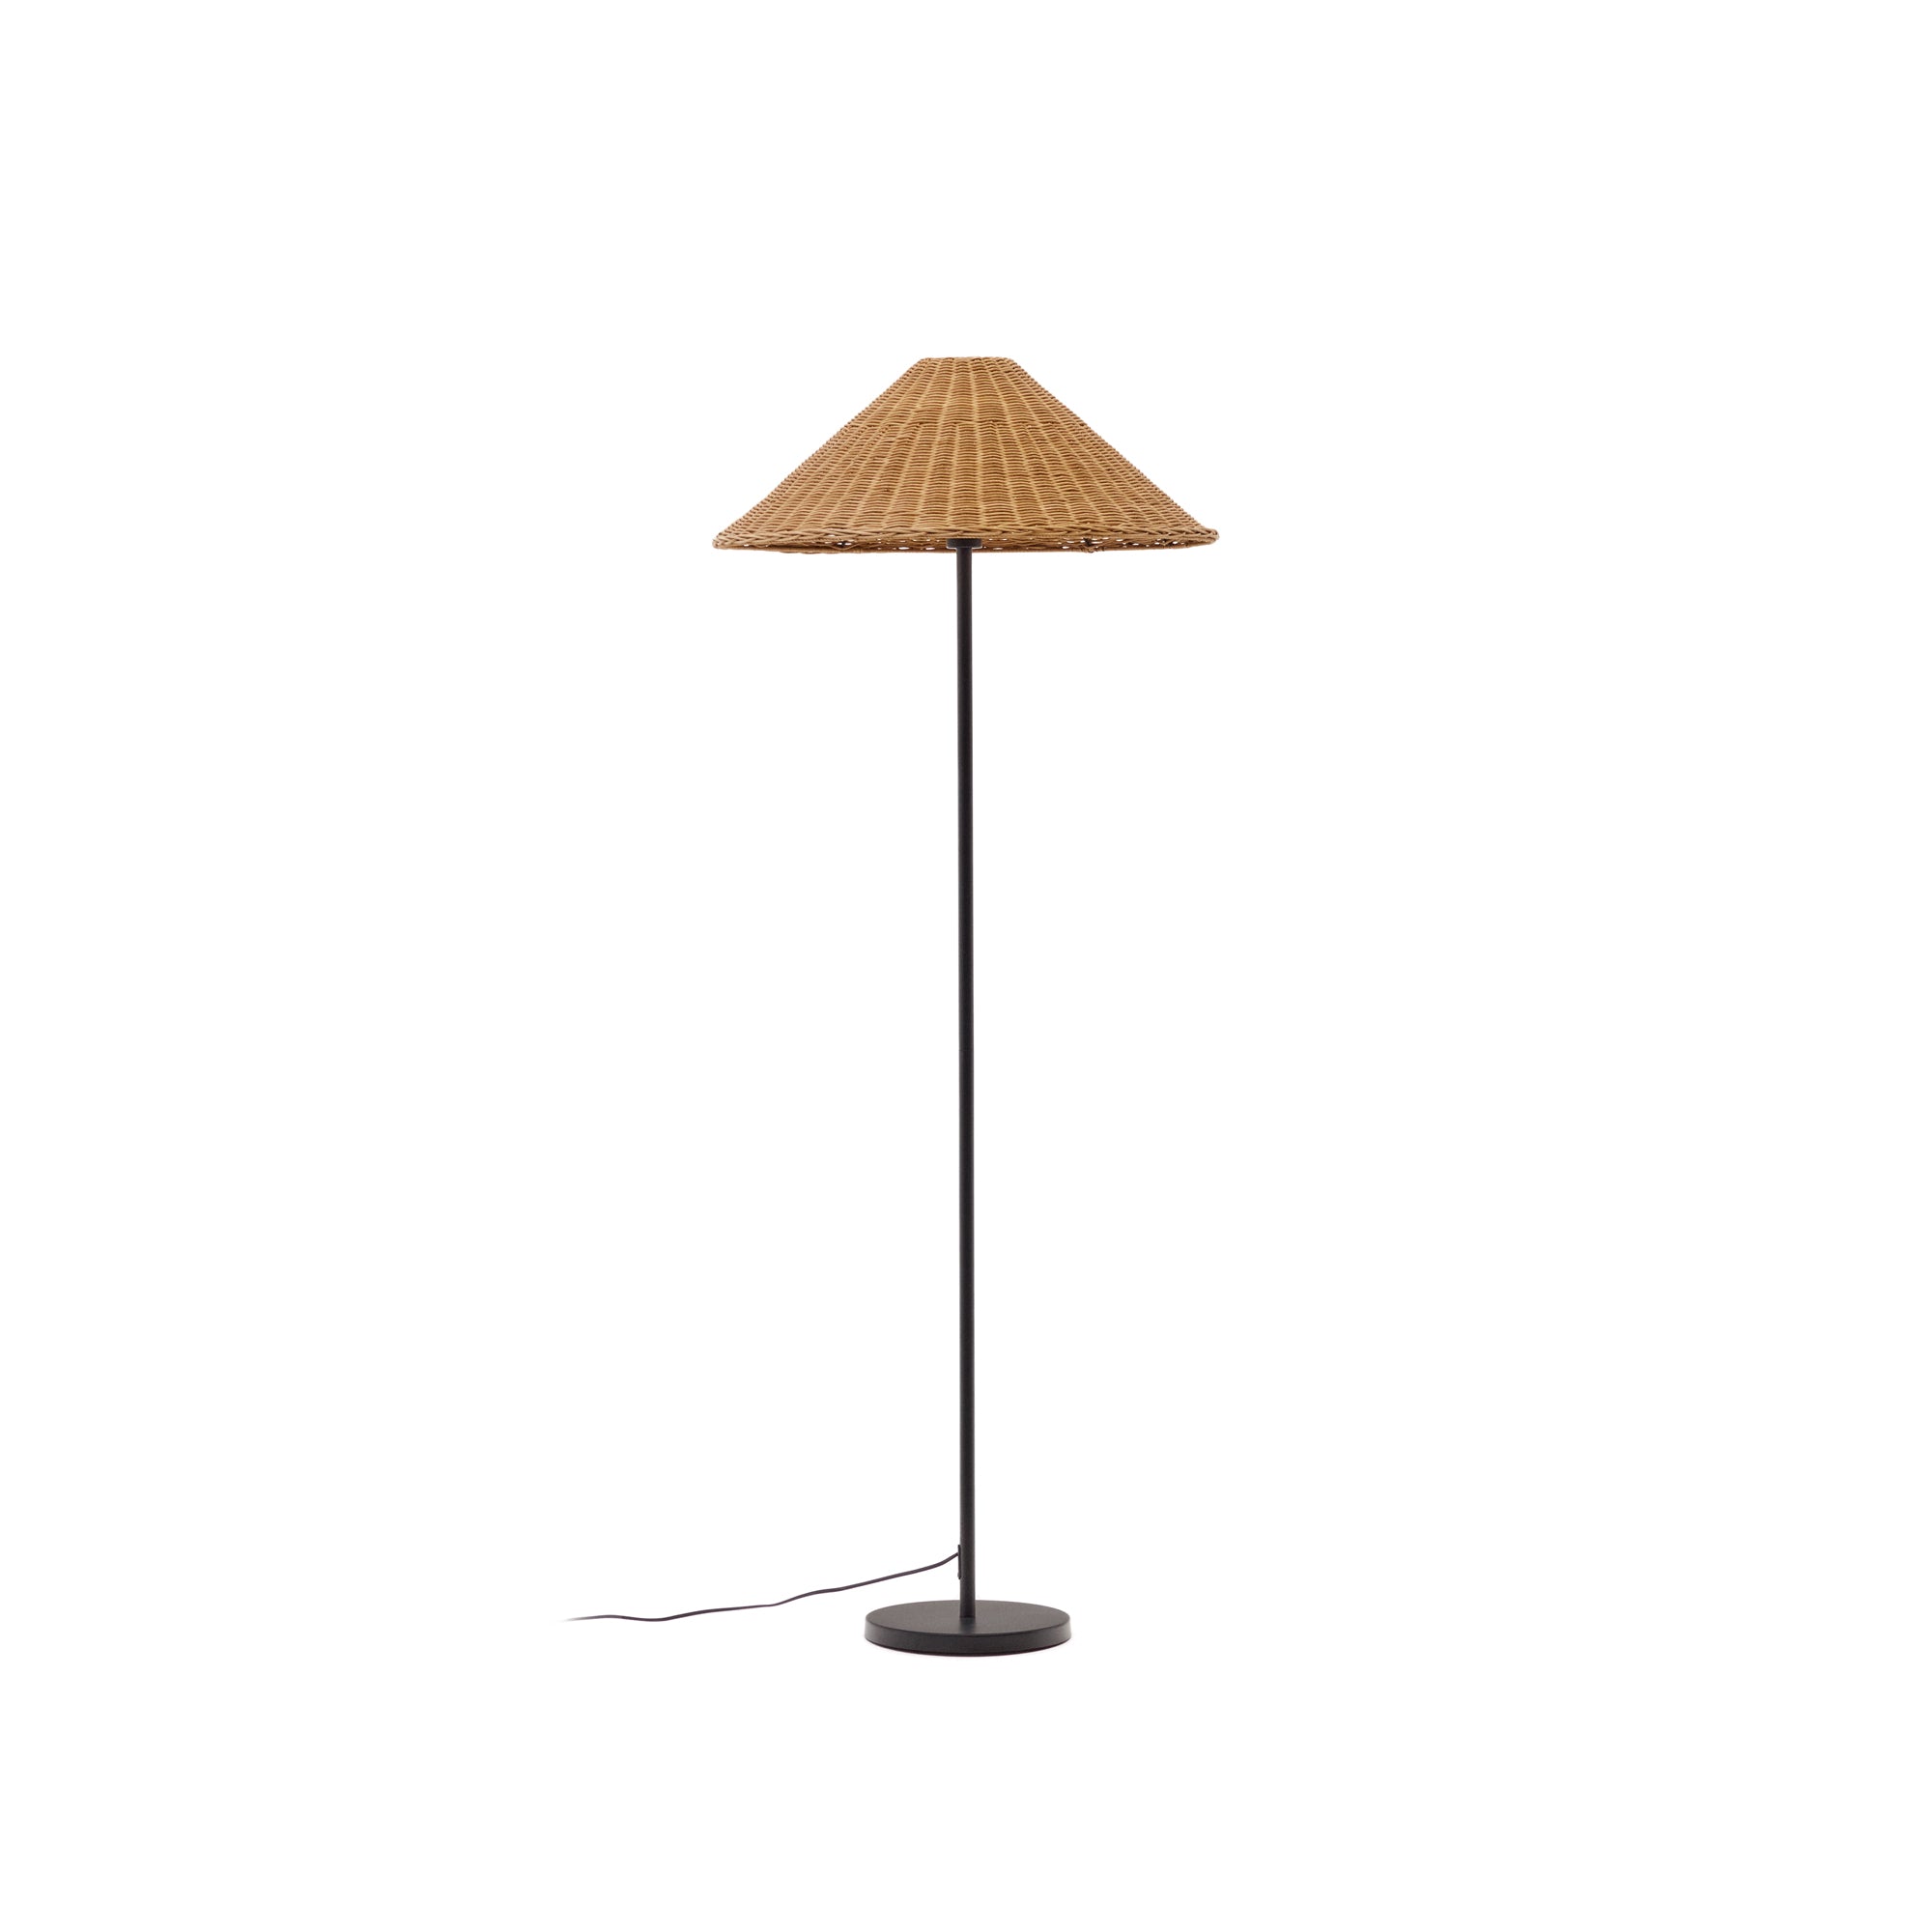 Urania floor lamp in rattan and metal with black painted finished